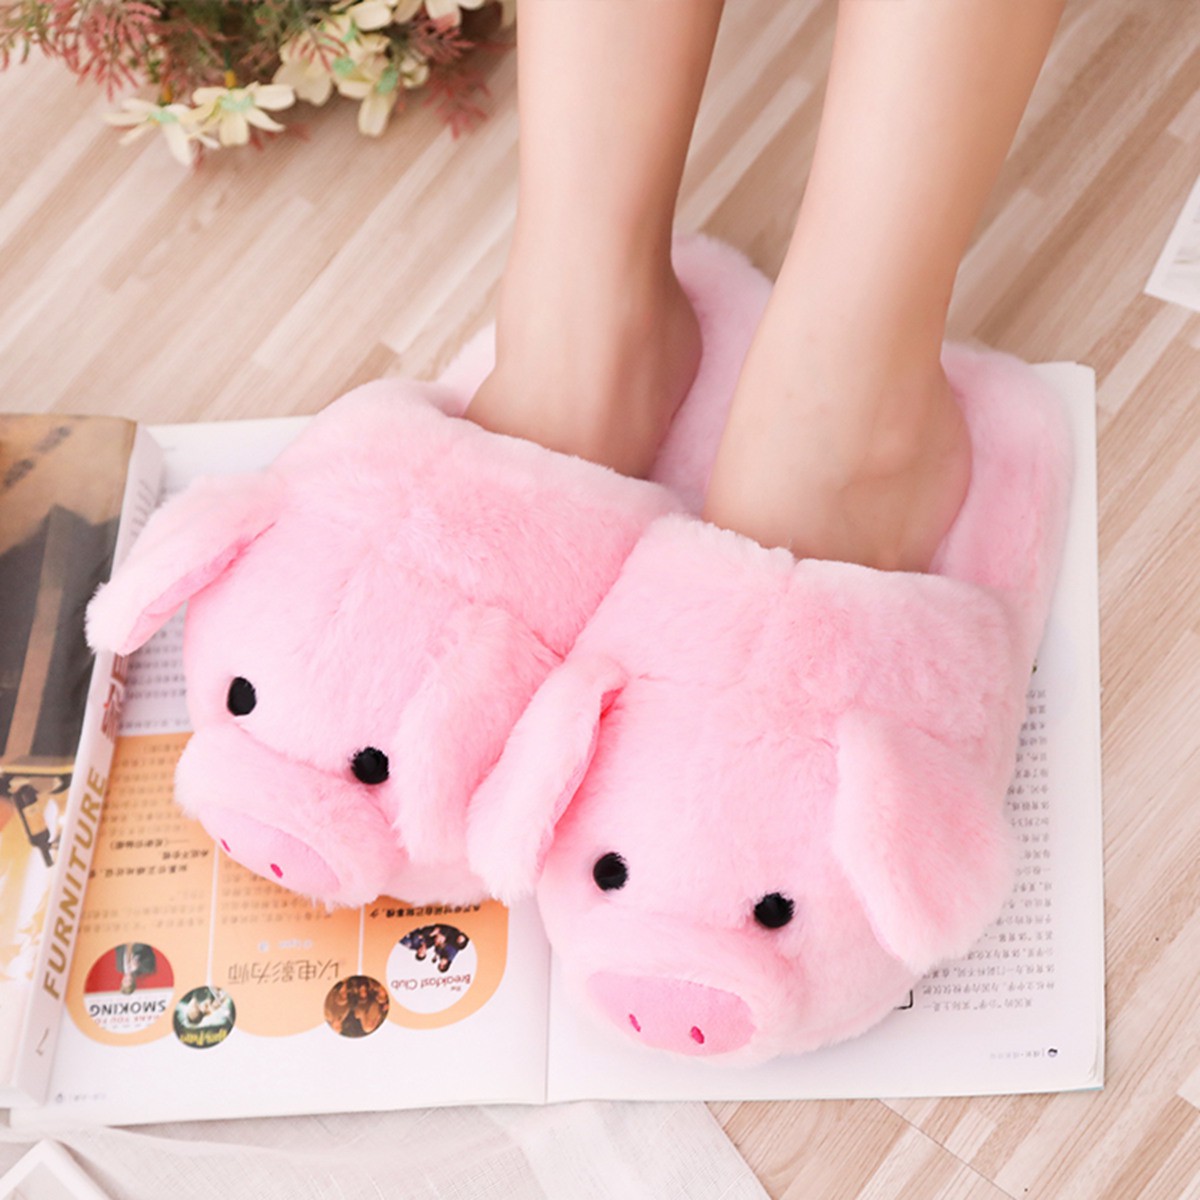 Cute Pink Doodle Pink Pig Slippers Home Indoor Pig Soft Girly Heart Cotton Drag Pig Warm Shoes